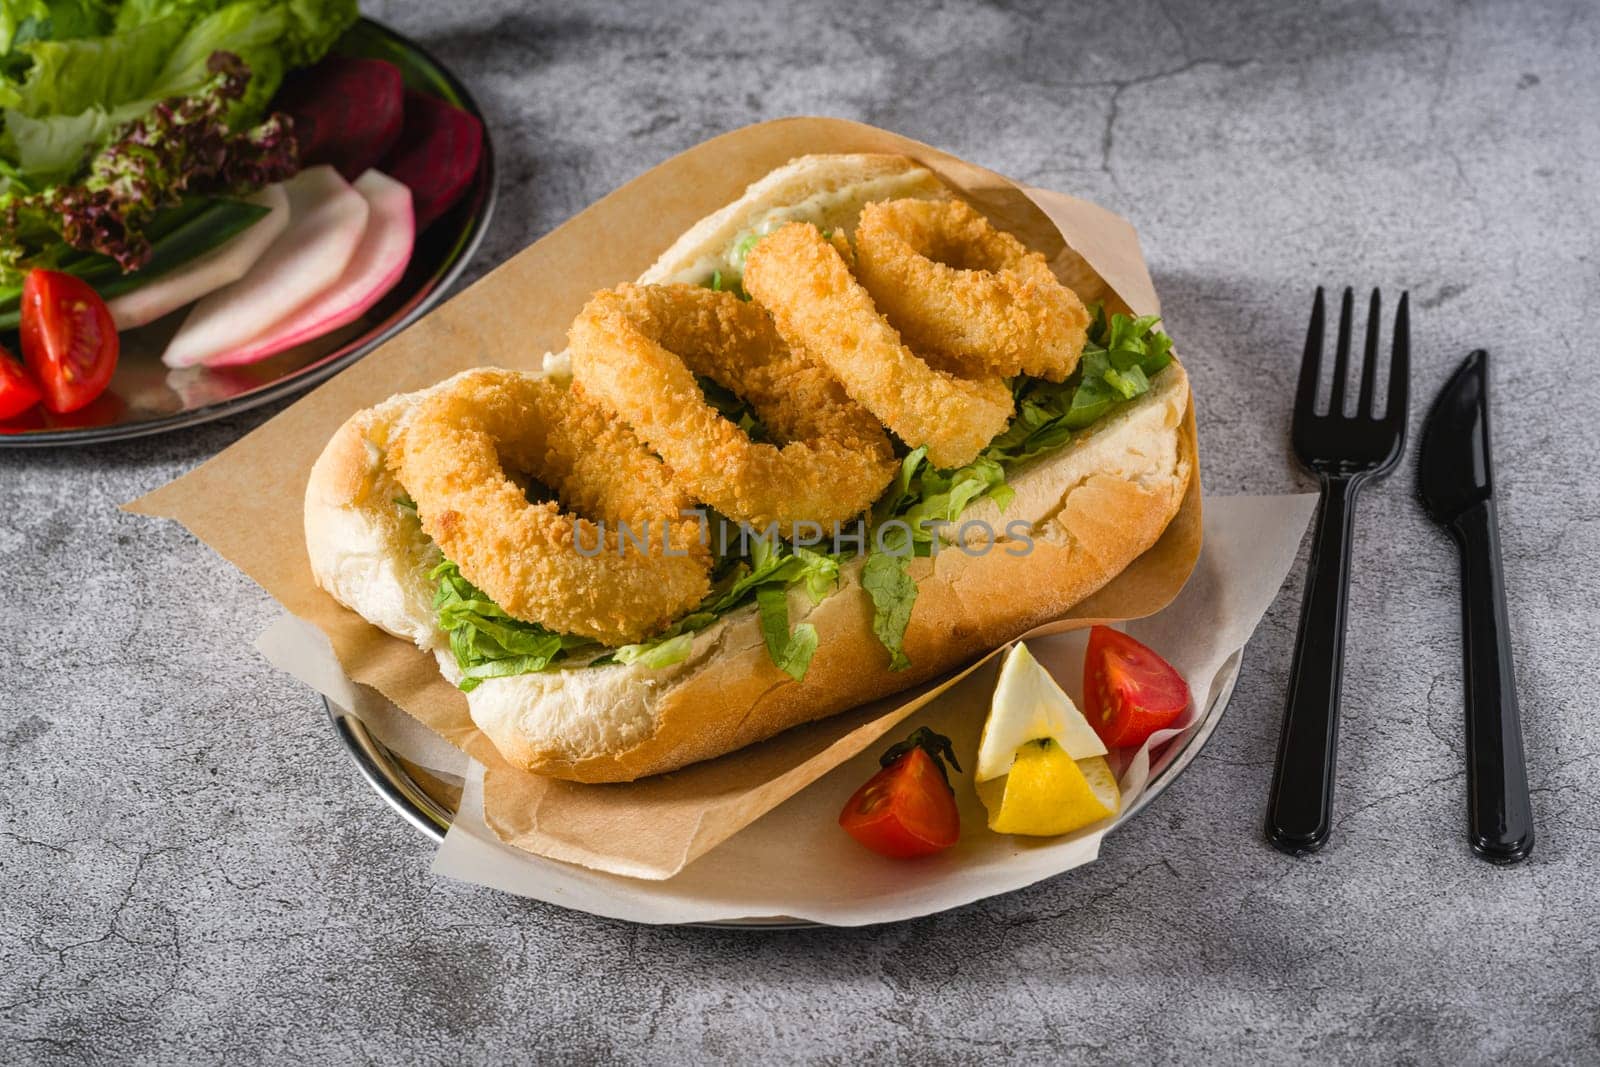 Deep fried squid in bread with greens on the side. Squid sandwich by Sonat